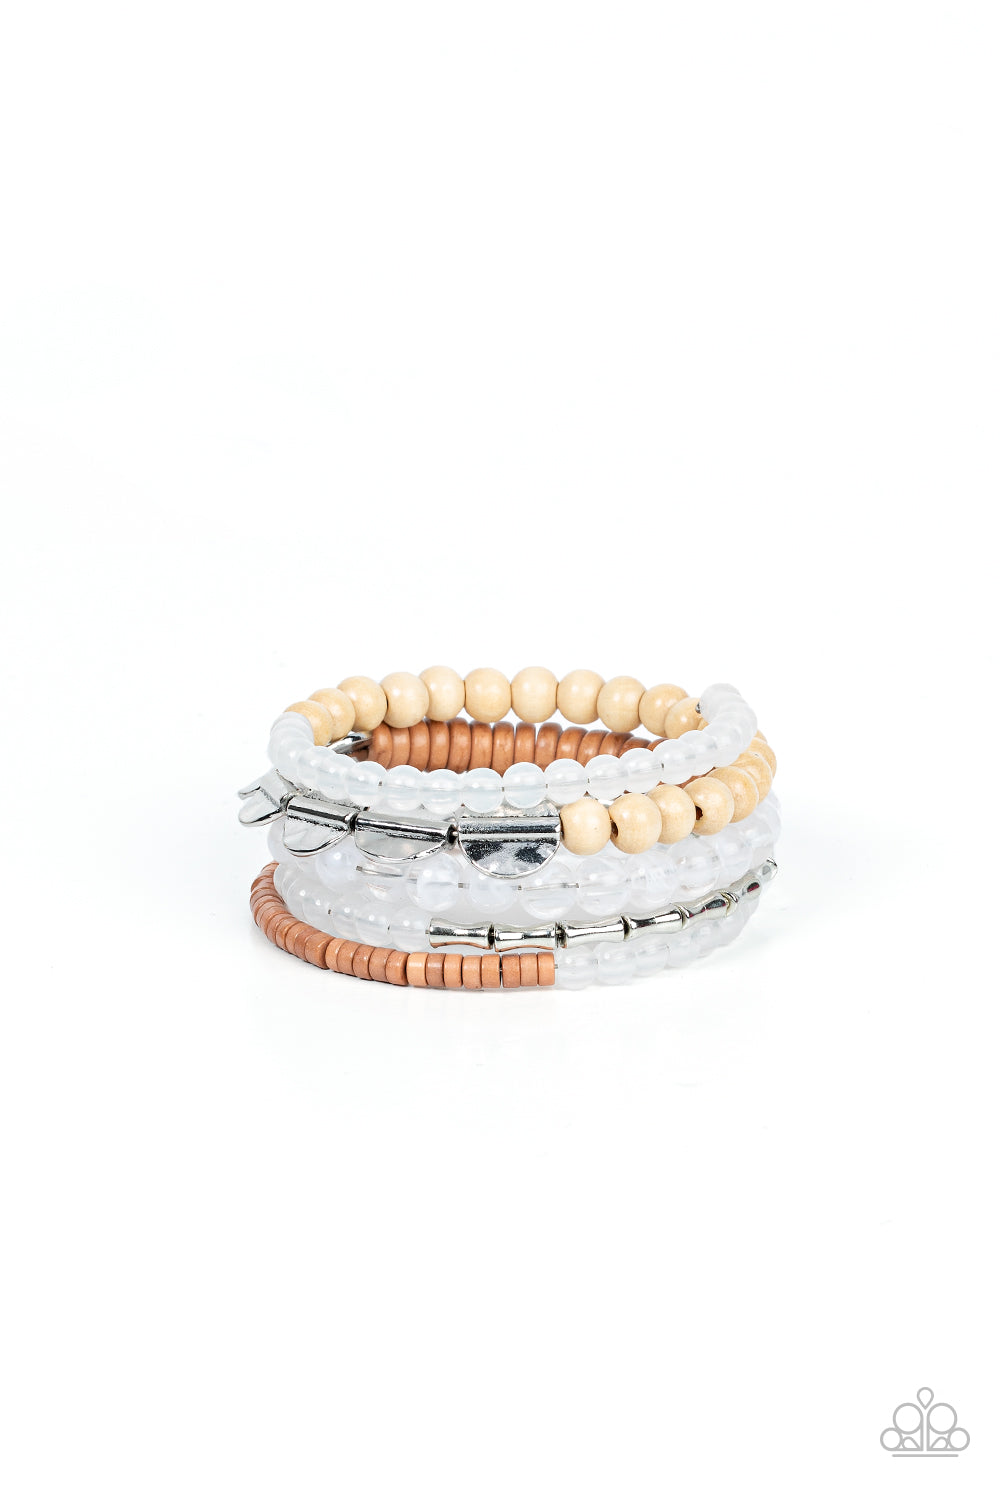 Free-Spirited Spiral White Bracelet - Paparazzi Accessories  Mismatched sections of glassy and opaque white beads join silver discs, brown wooden beads, and brown disc-like beads along a coiled wire, creating an earthy infinity wrap bracelet around the wrist.  Sold as one individual bracelet.